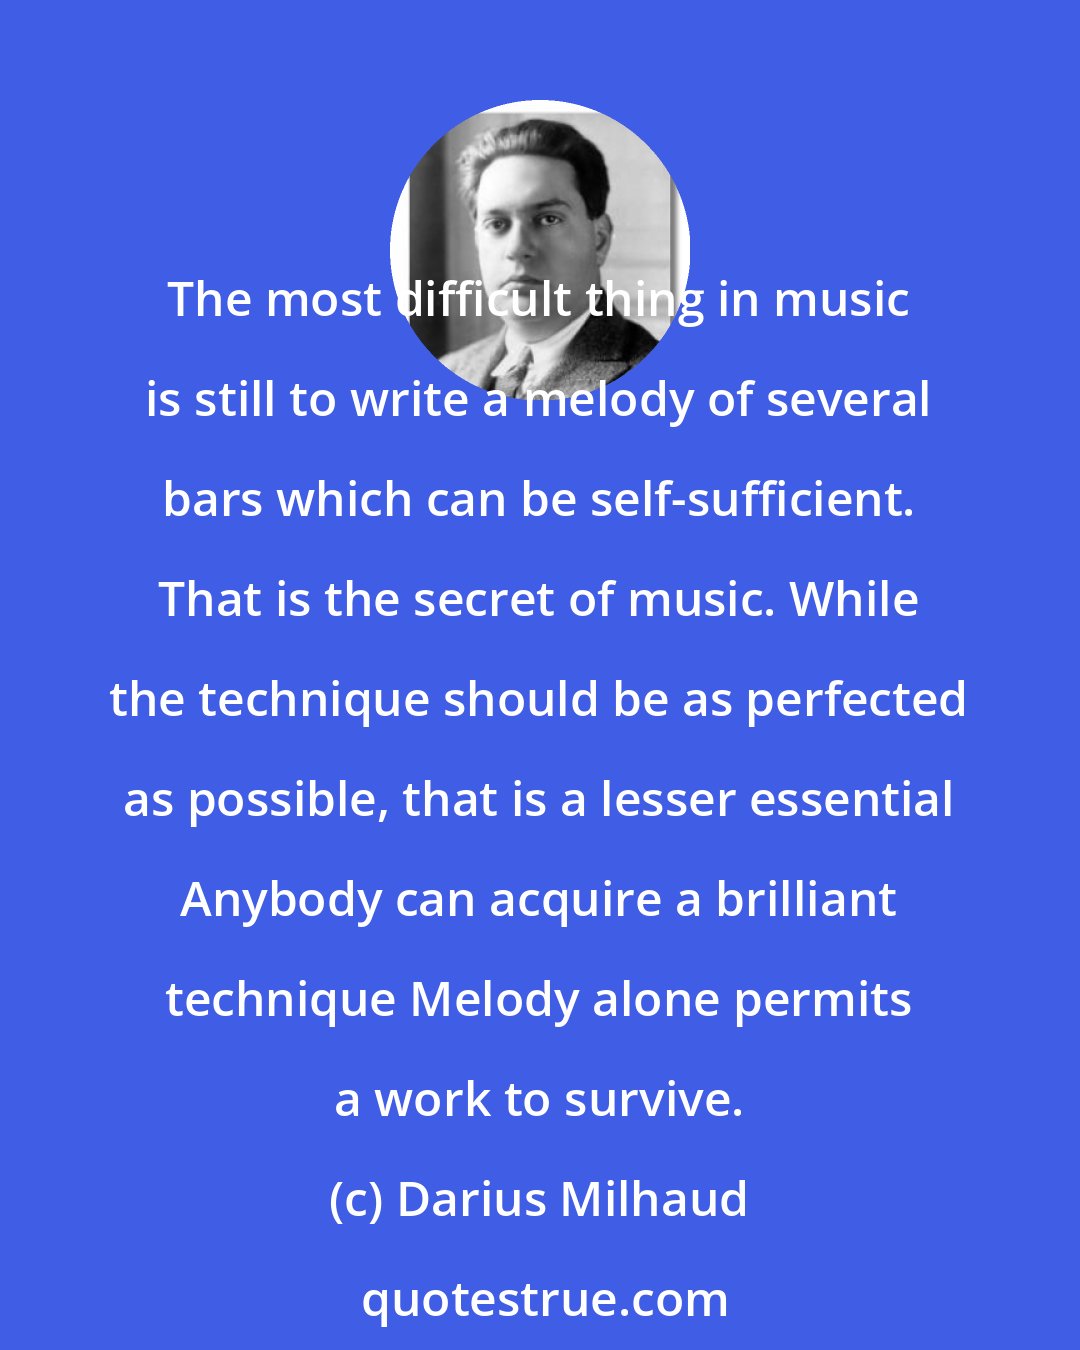 Darius Milhaud: The most difficult thing in music is still to write a melody of several bars which can be self-sufficient. That is the secret of music. While the technique should be as perfected as possible, that is a lesser essential Anybody can acquire a brilliant technique Melody alone permits a work to survive.